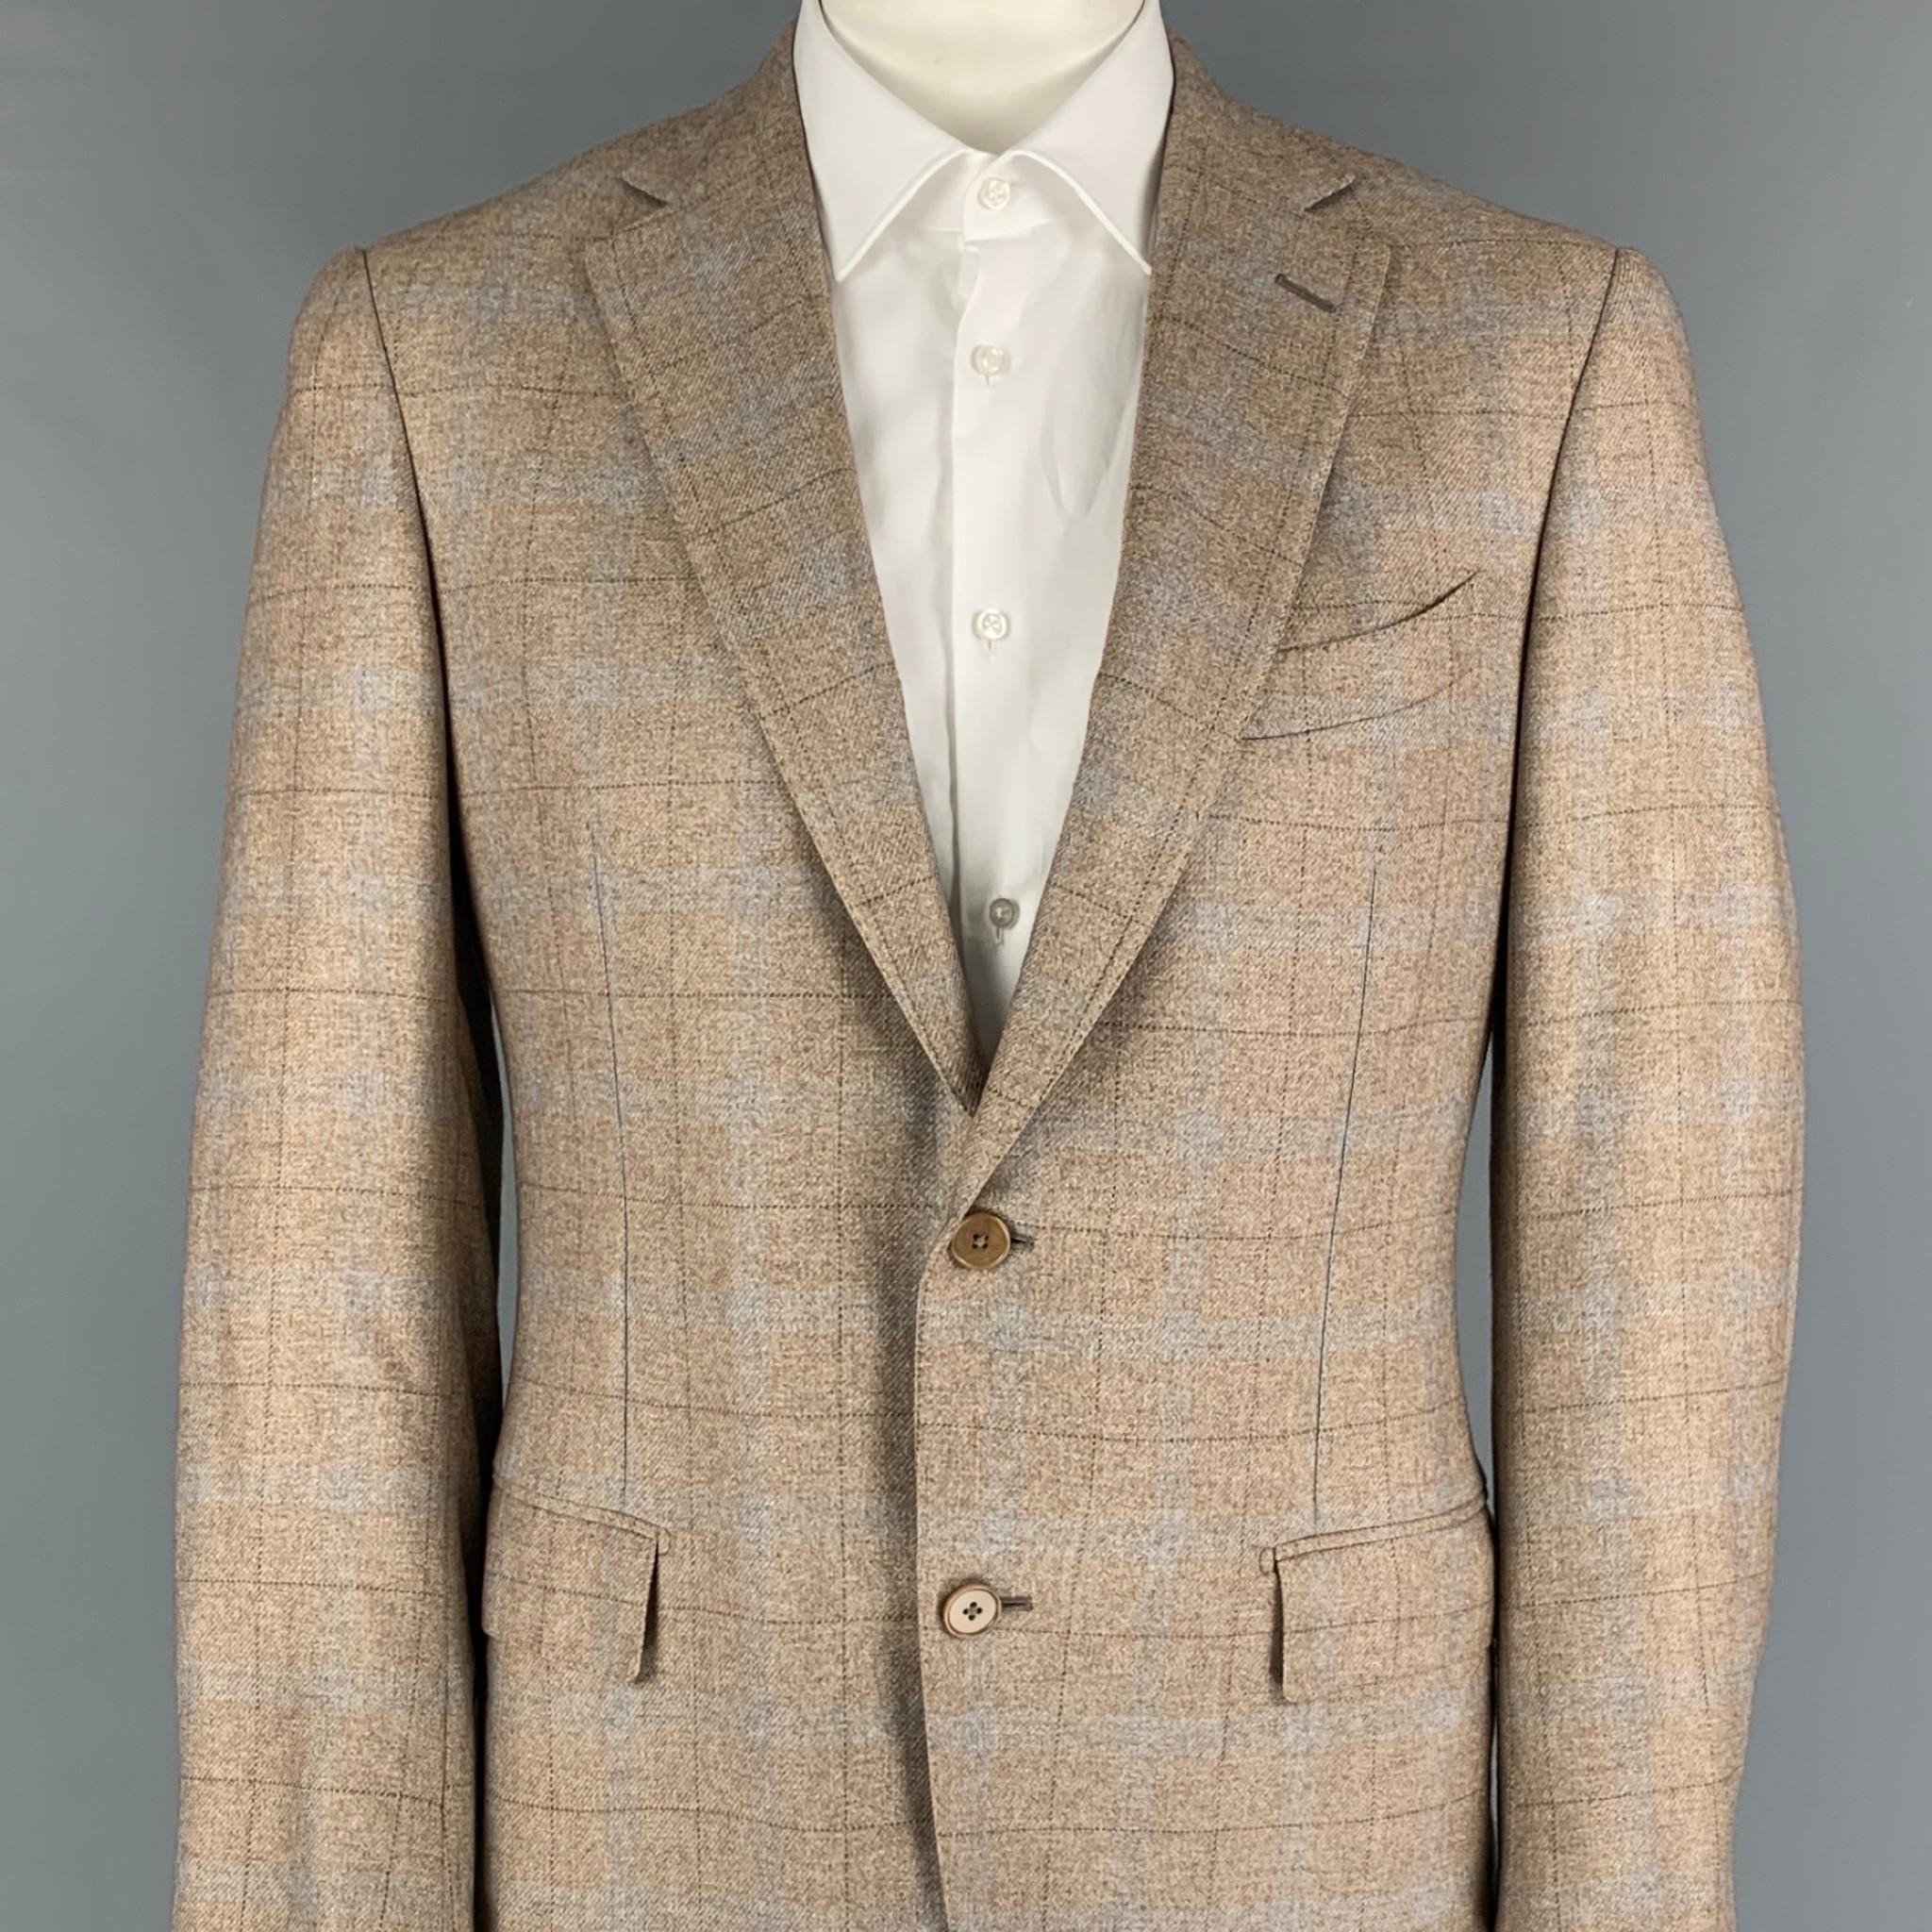 ERMENEGILDO ZEGNA sport coat comes in a oatmeal & light grey plaid silk / cashmere with a full liner featuring a notch lapel, flap pockets, double back vent, and a double button closure. 

Very Good Pre-Owned Condition.
Marked: 52